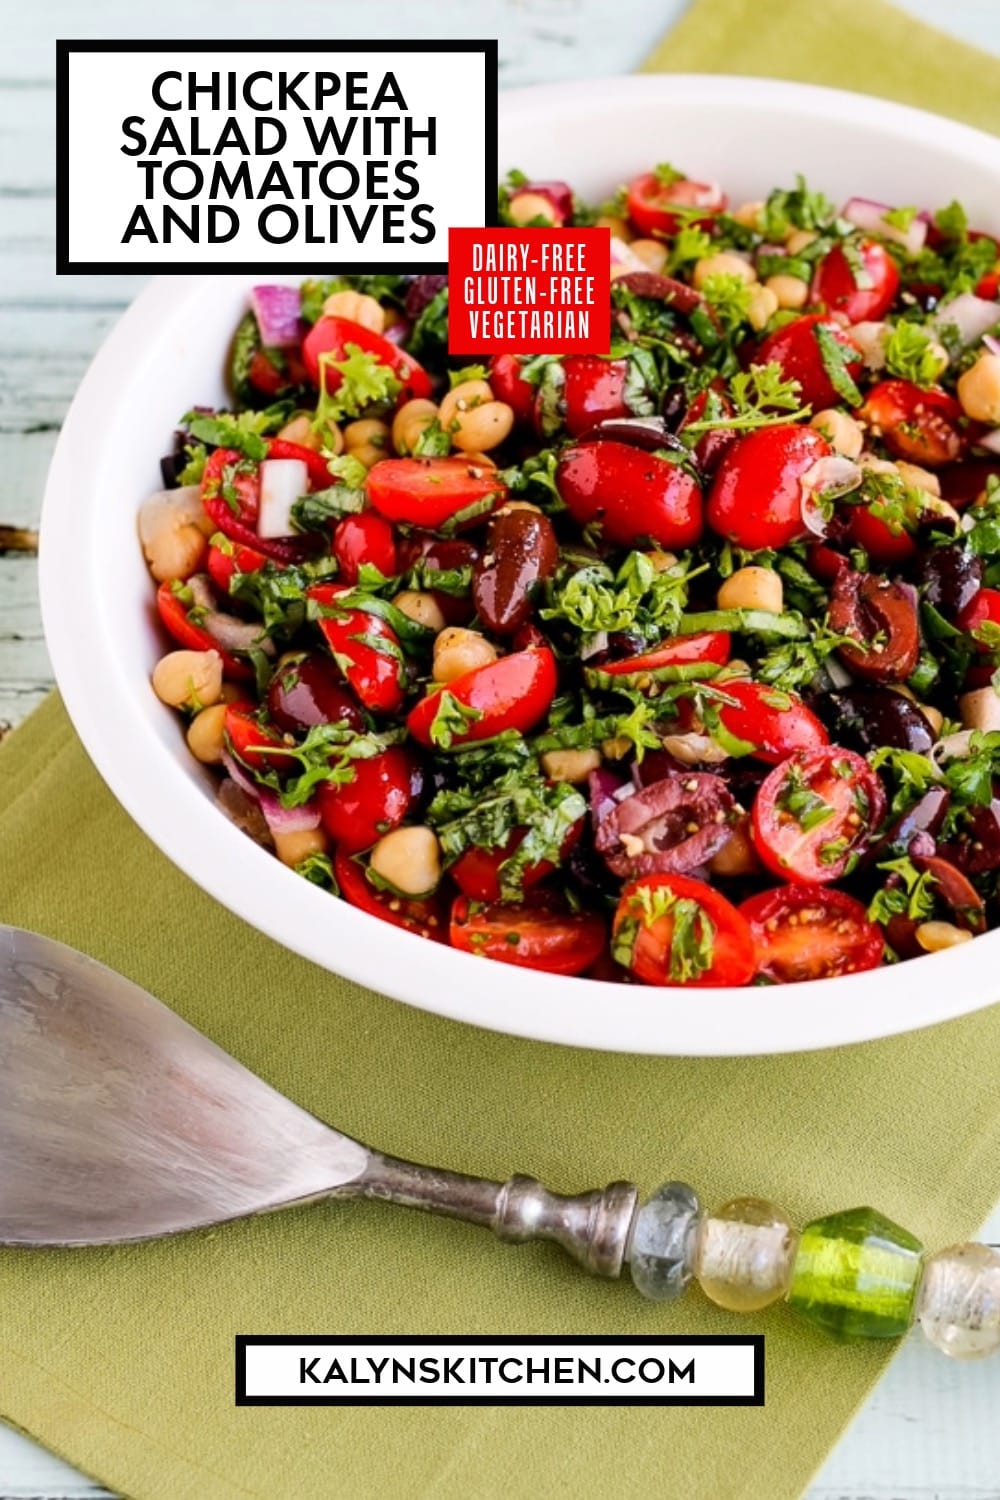 Pinterest image of Chickpea Salad with Tomatoes and Olives